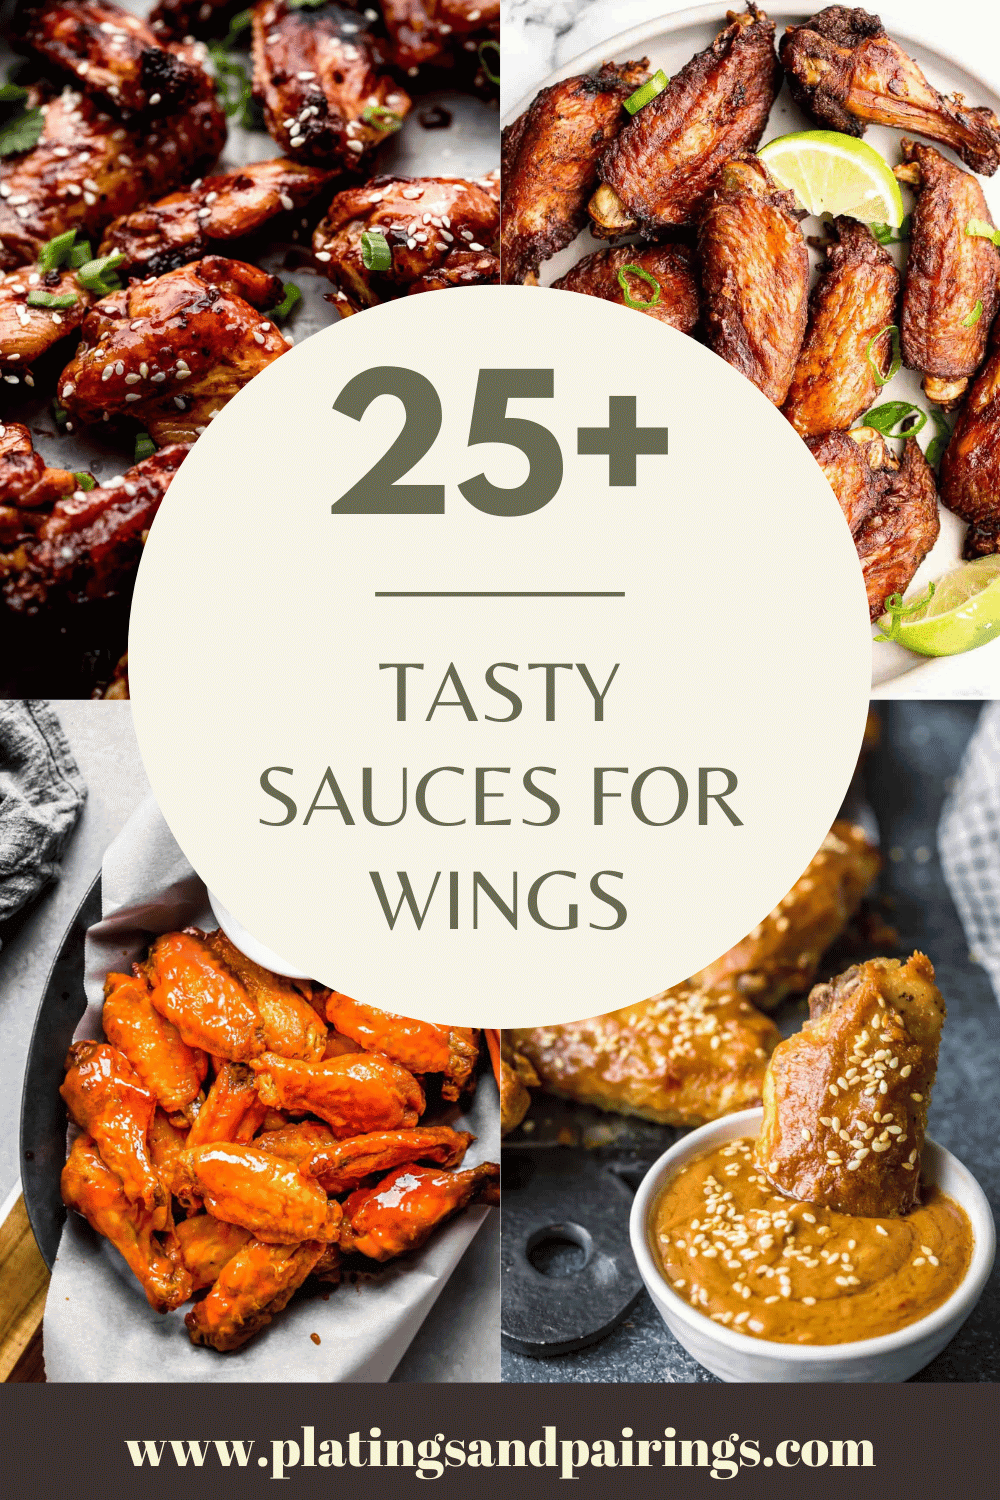 Collage of sauces for wings with text overlay.